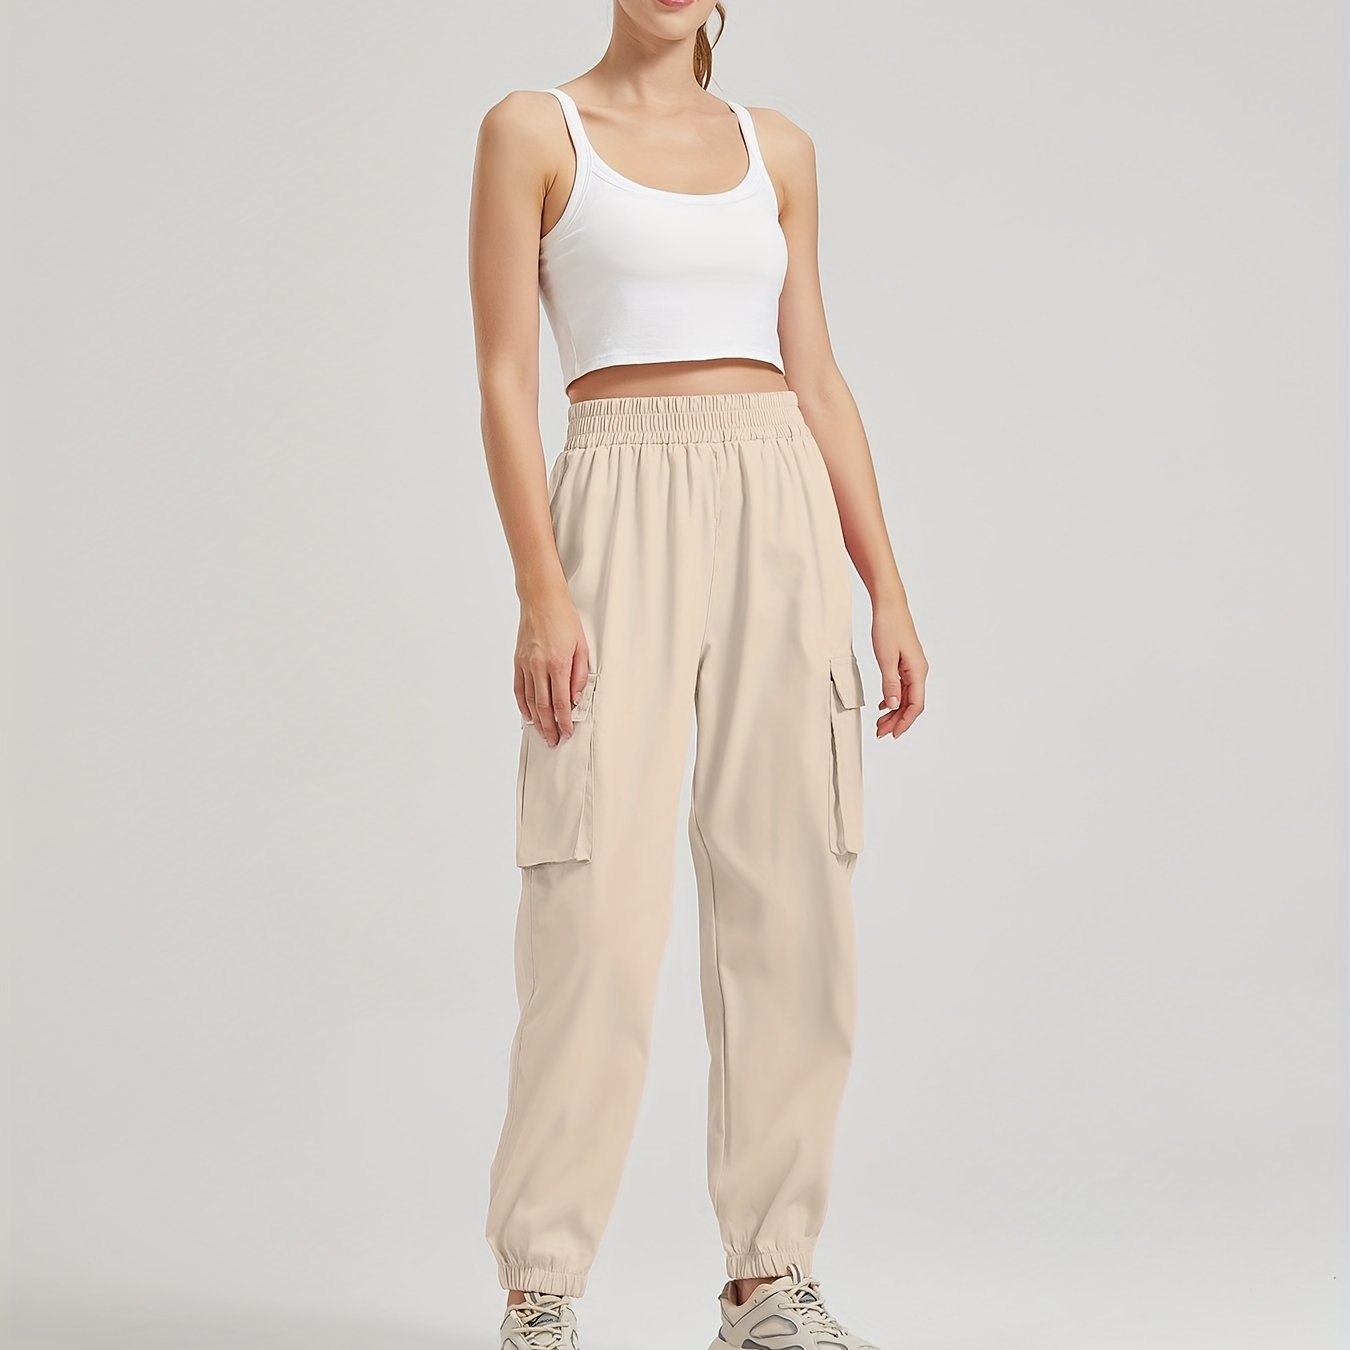 Solid Color Casual Joggers Sweatpant, Cargo Loose High Waisted Pants With Pockets, Women's Athleisure